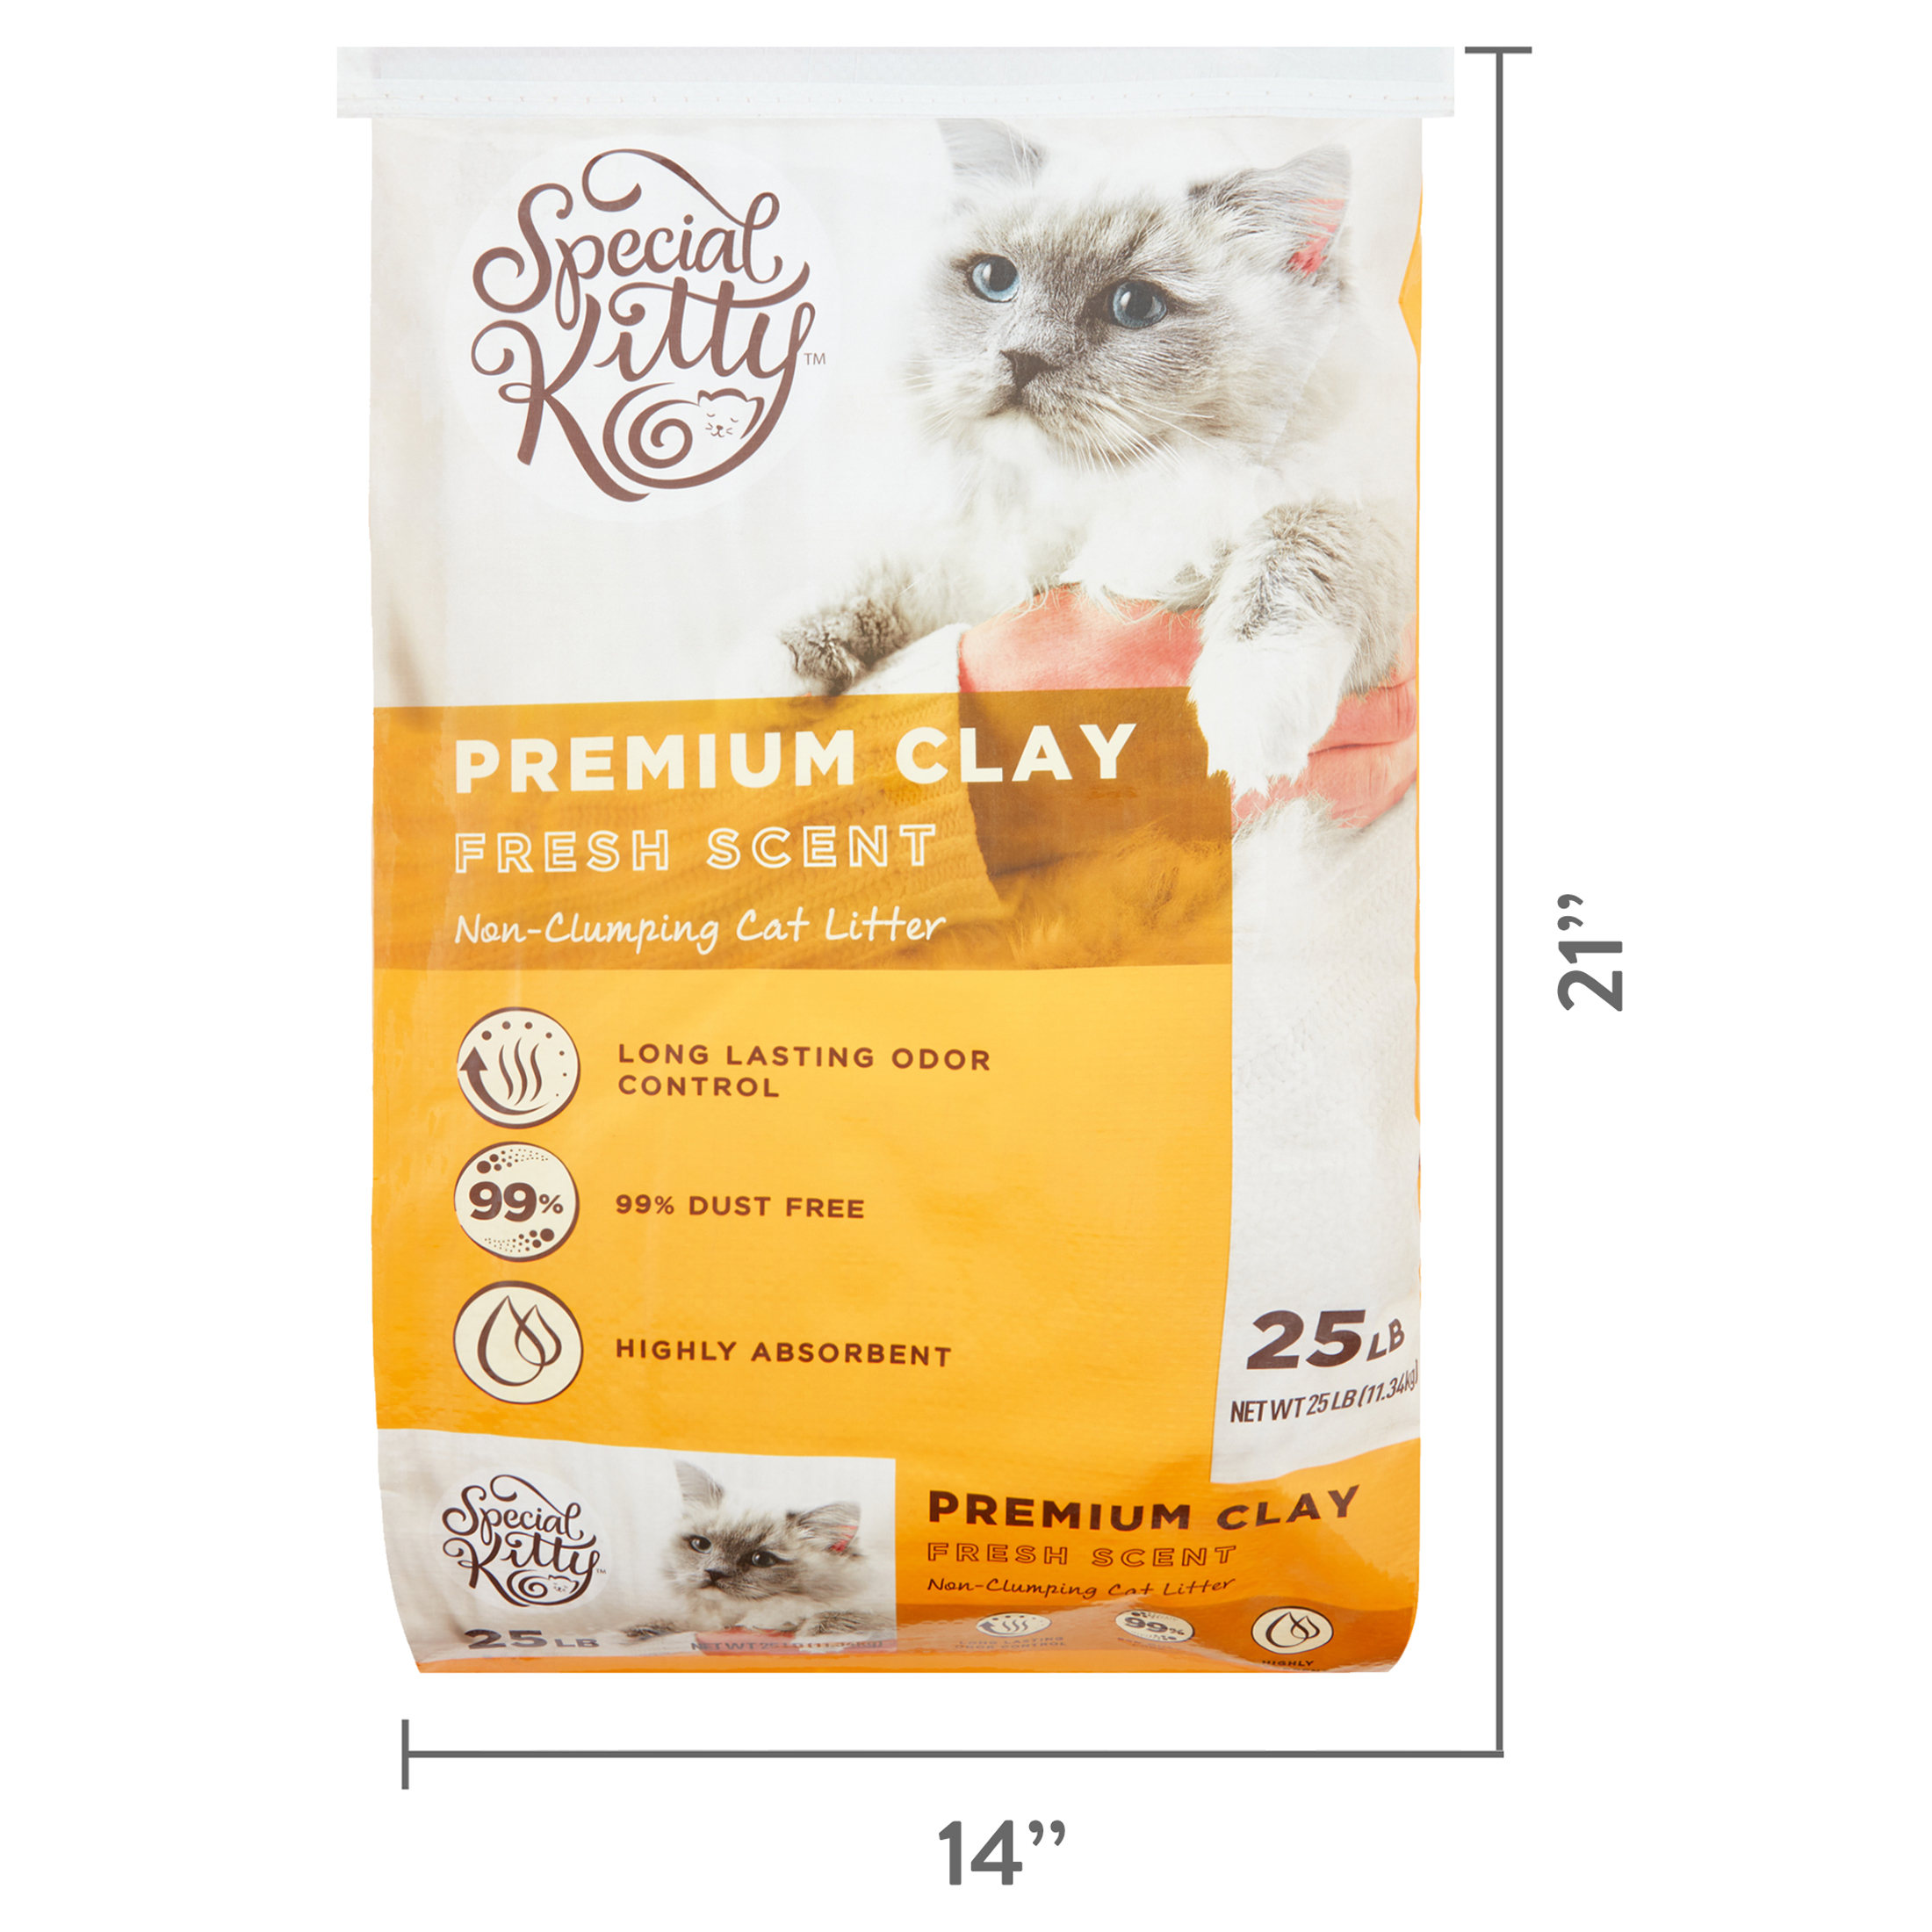 Special Kitty Premium Clay Non-Clumping Cat Litter, Fresh Scent, 25 lb - image 3 of 7